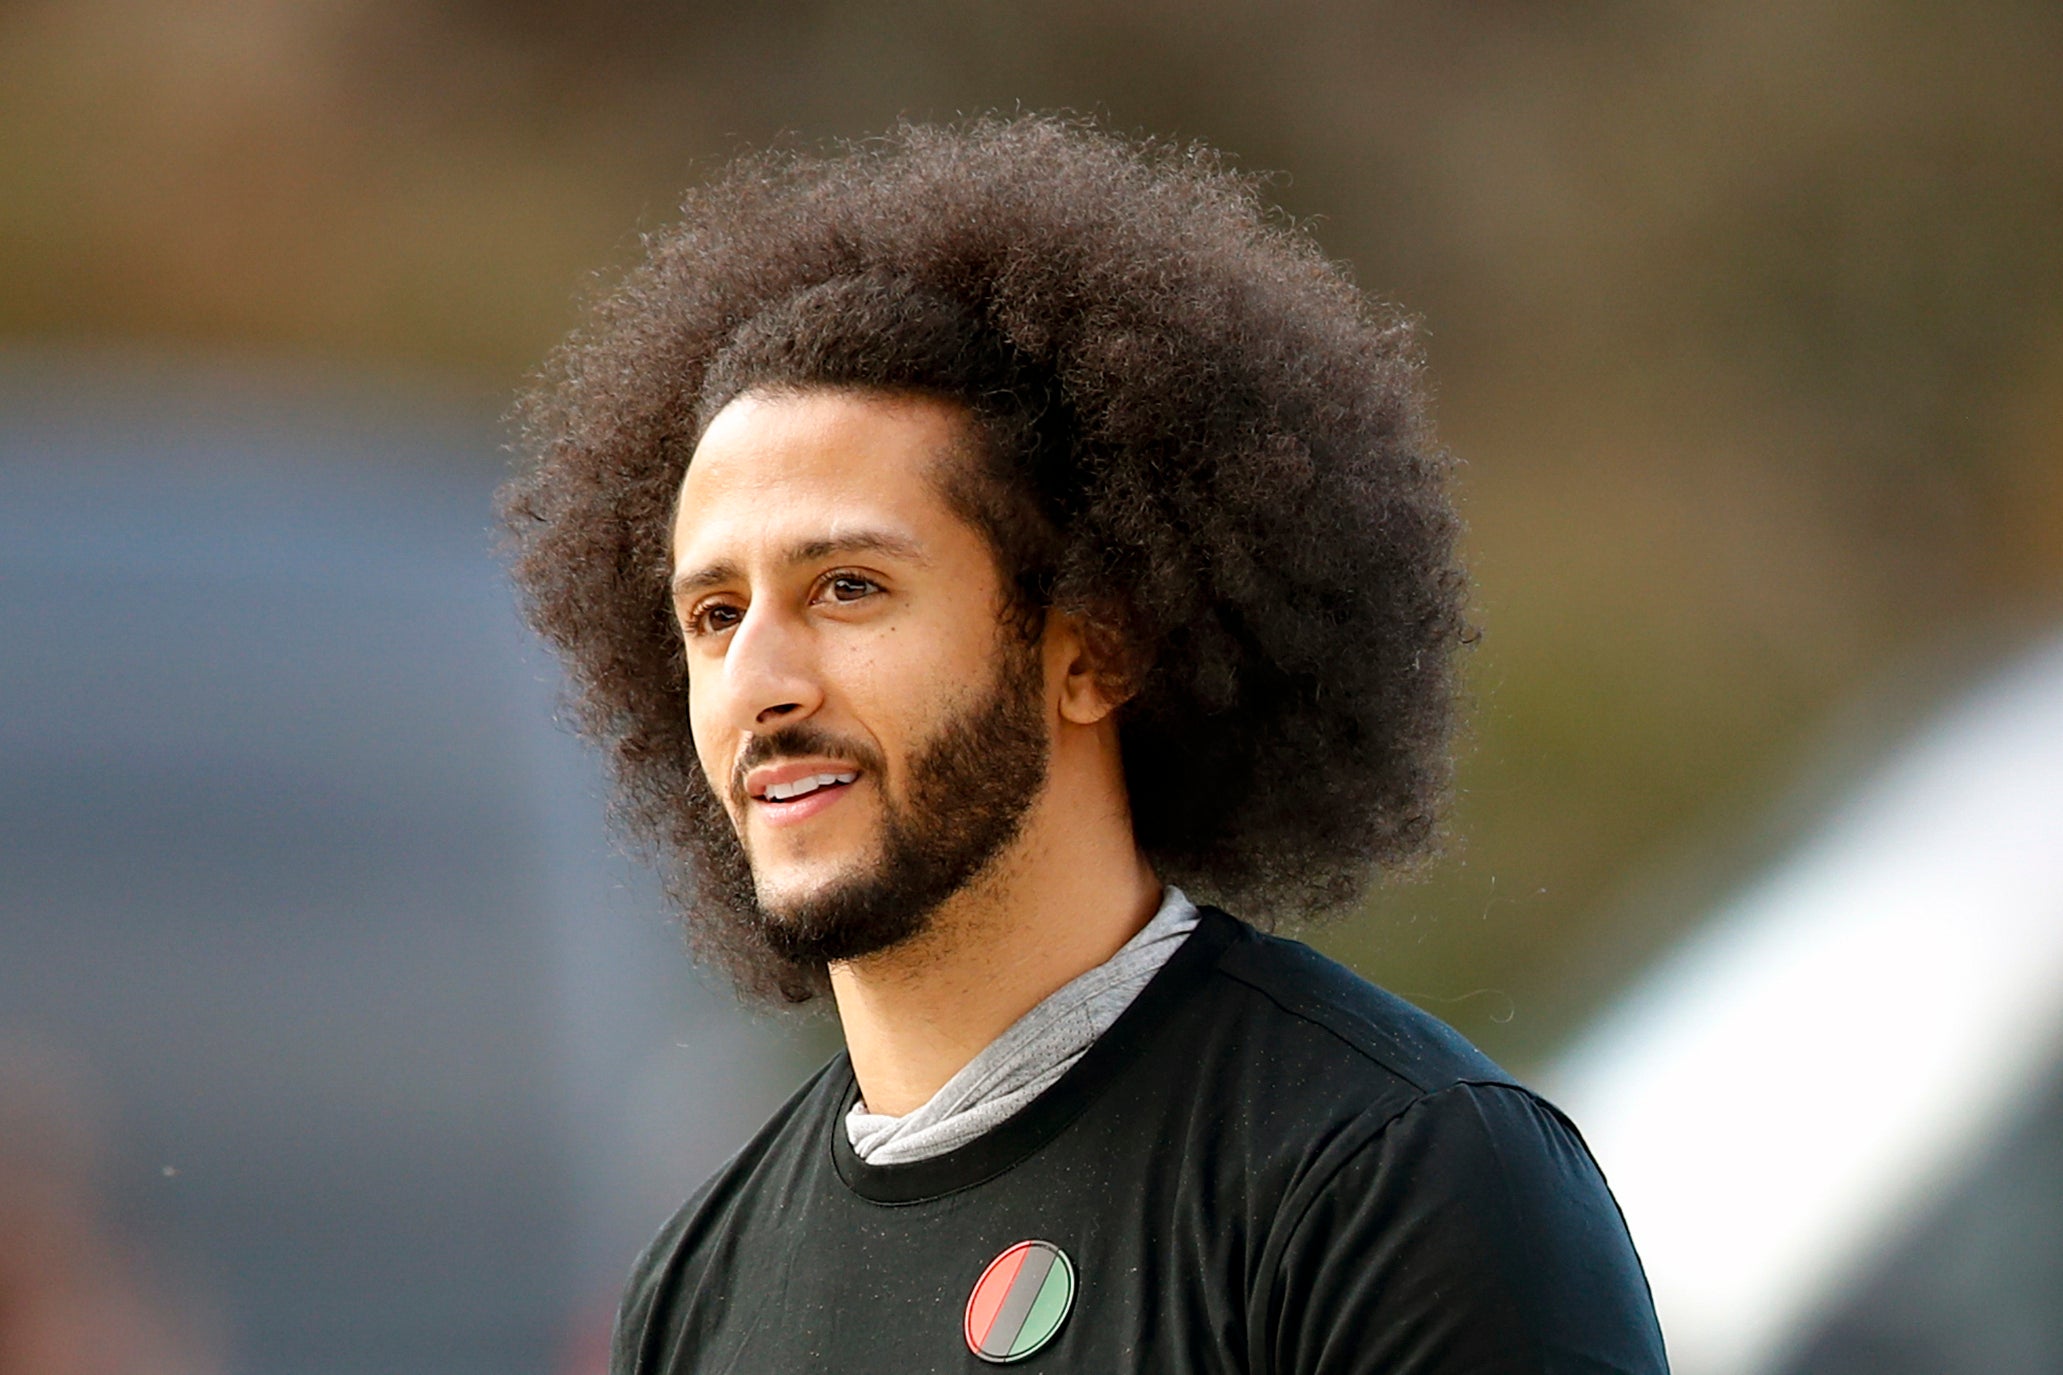 File: Colin Kaepernick’s Know Your Rights Camp organisation announces new initiative that will pay for private autopsies of Americans killed in police-related deaths